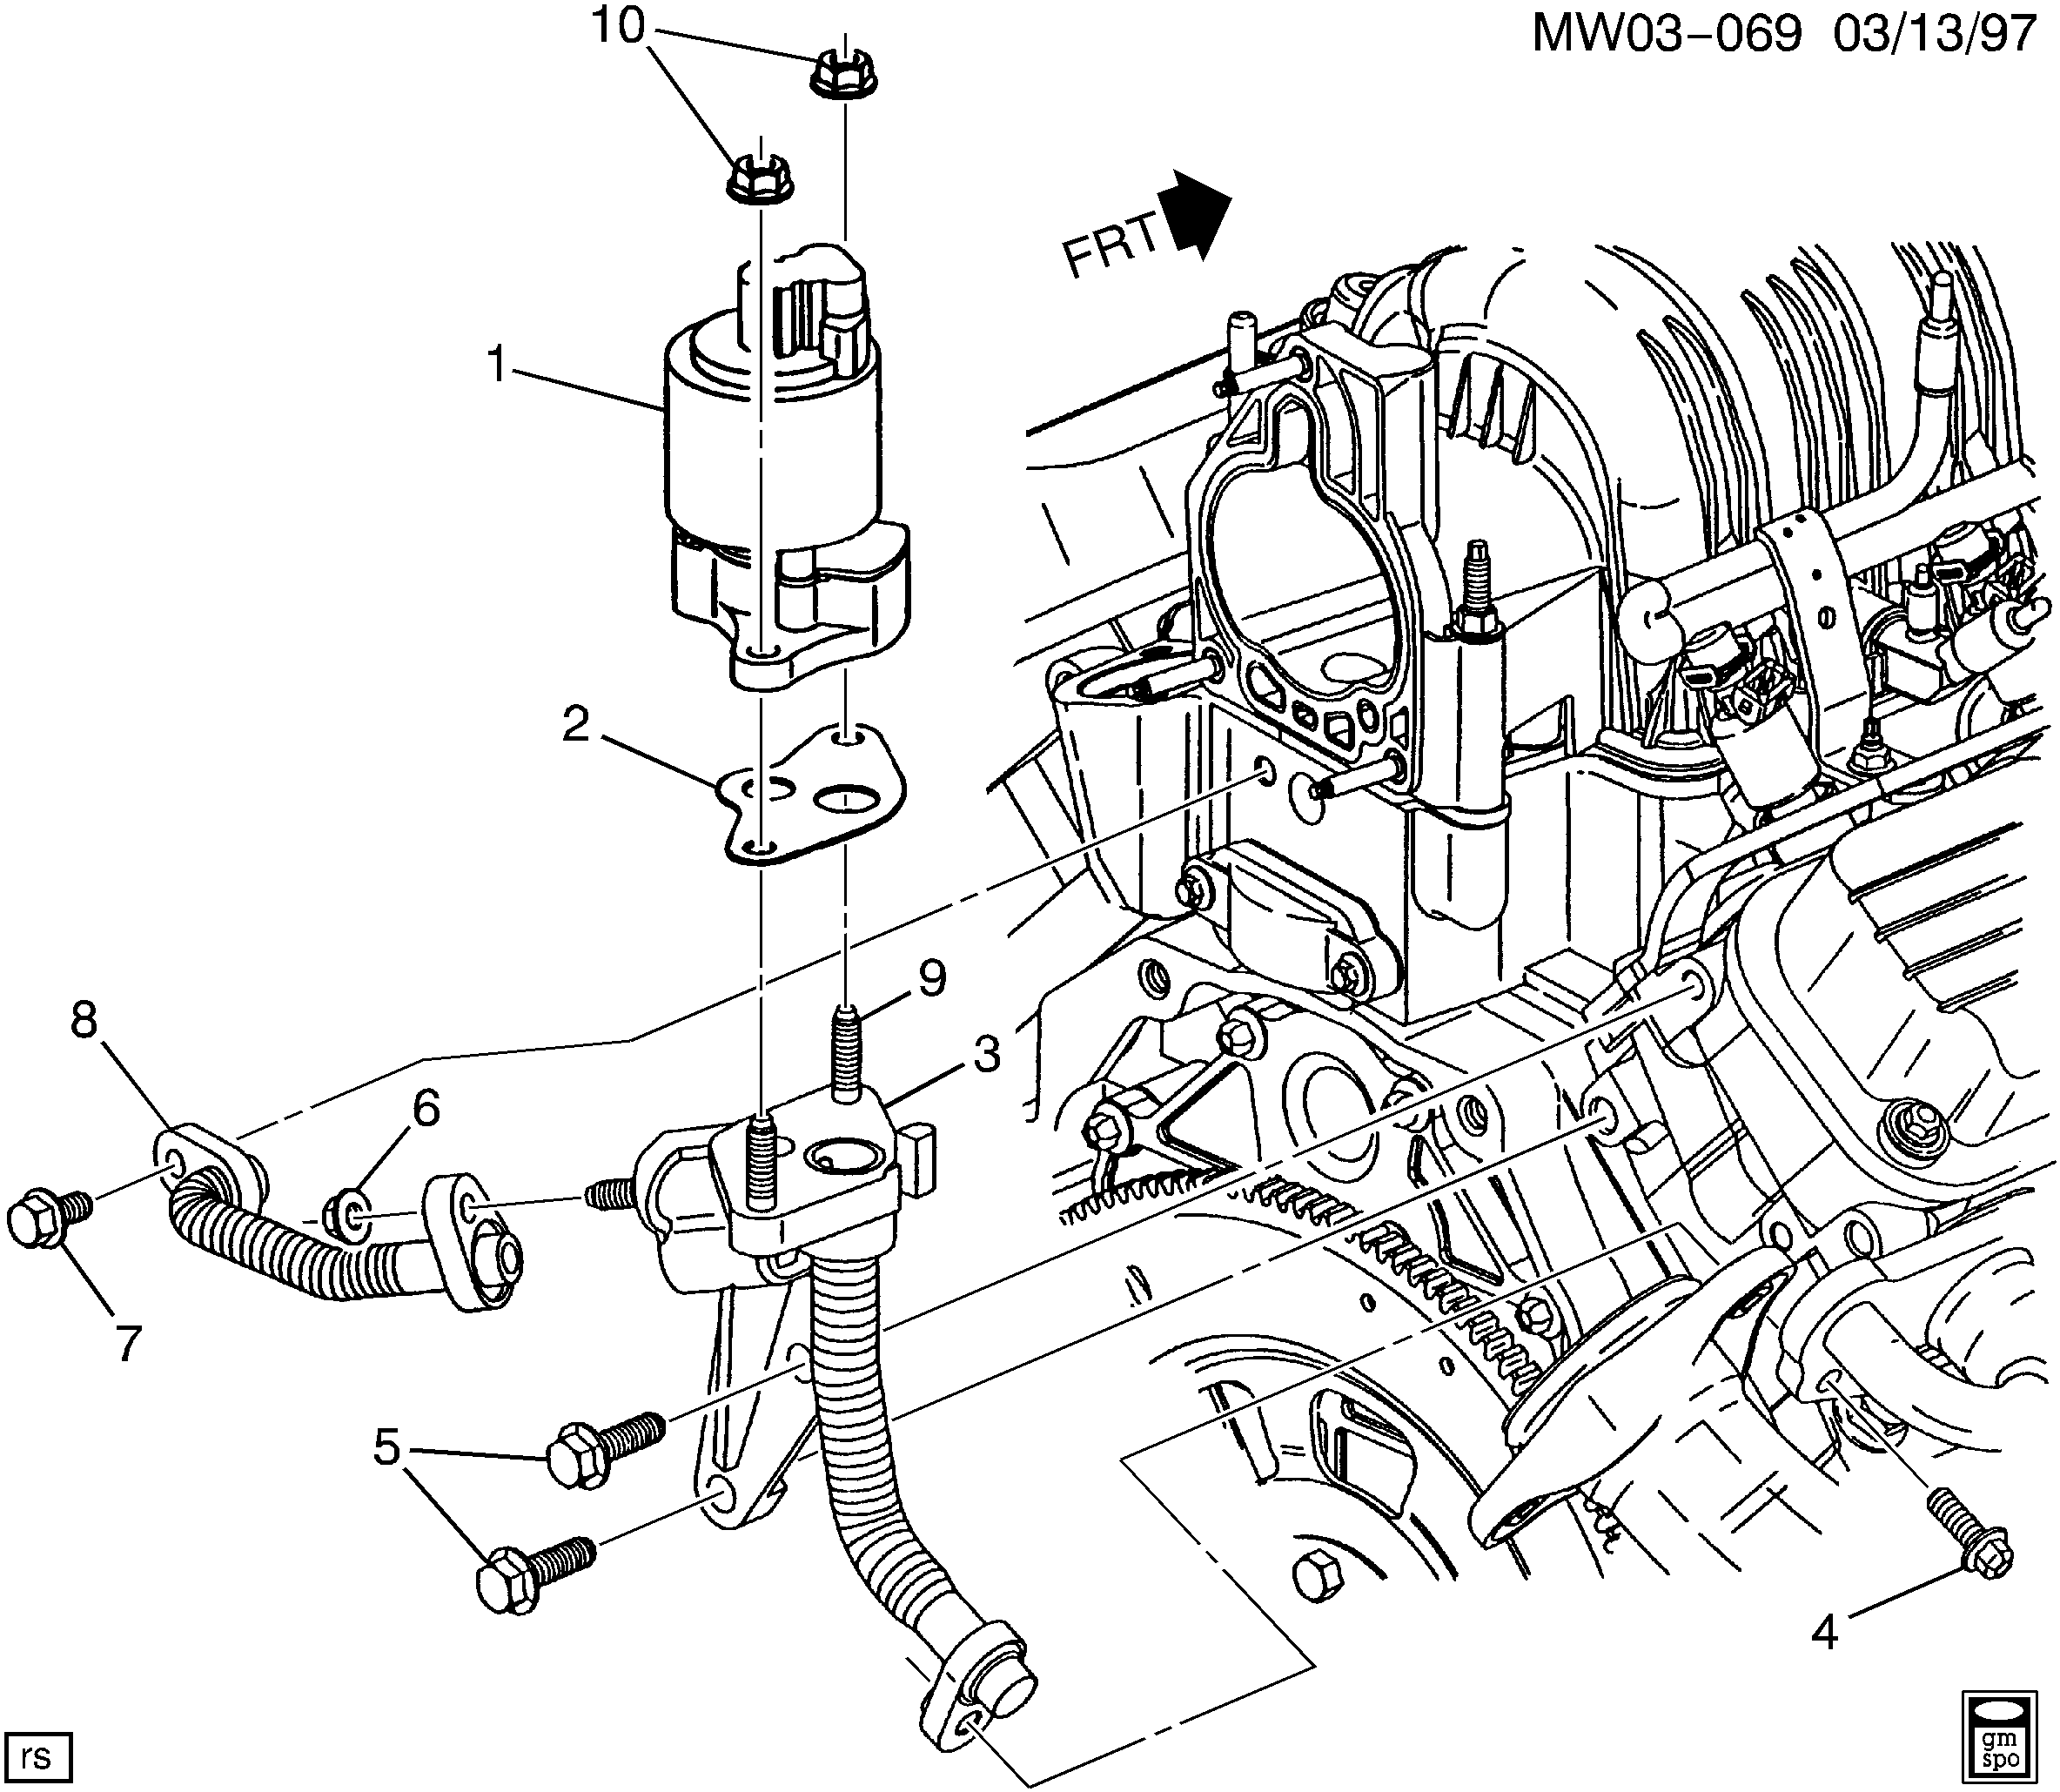 2000-2003 W19-27 E.G.R. VALVE & RELATED PARTS (L36/3.8K)